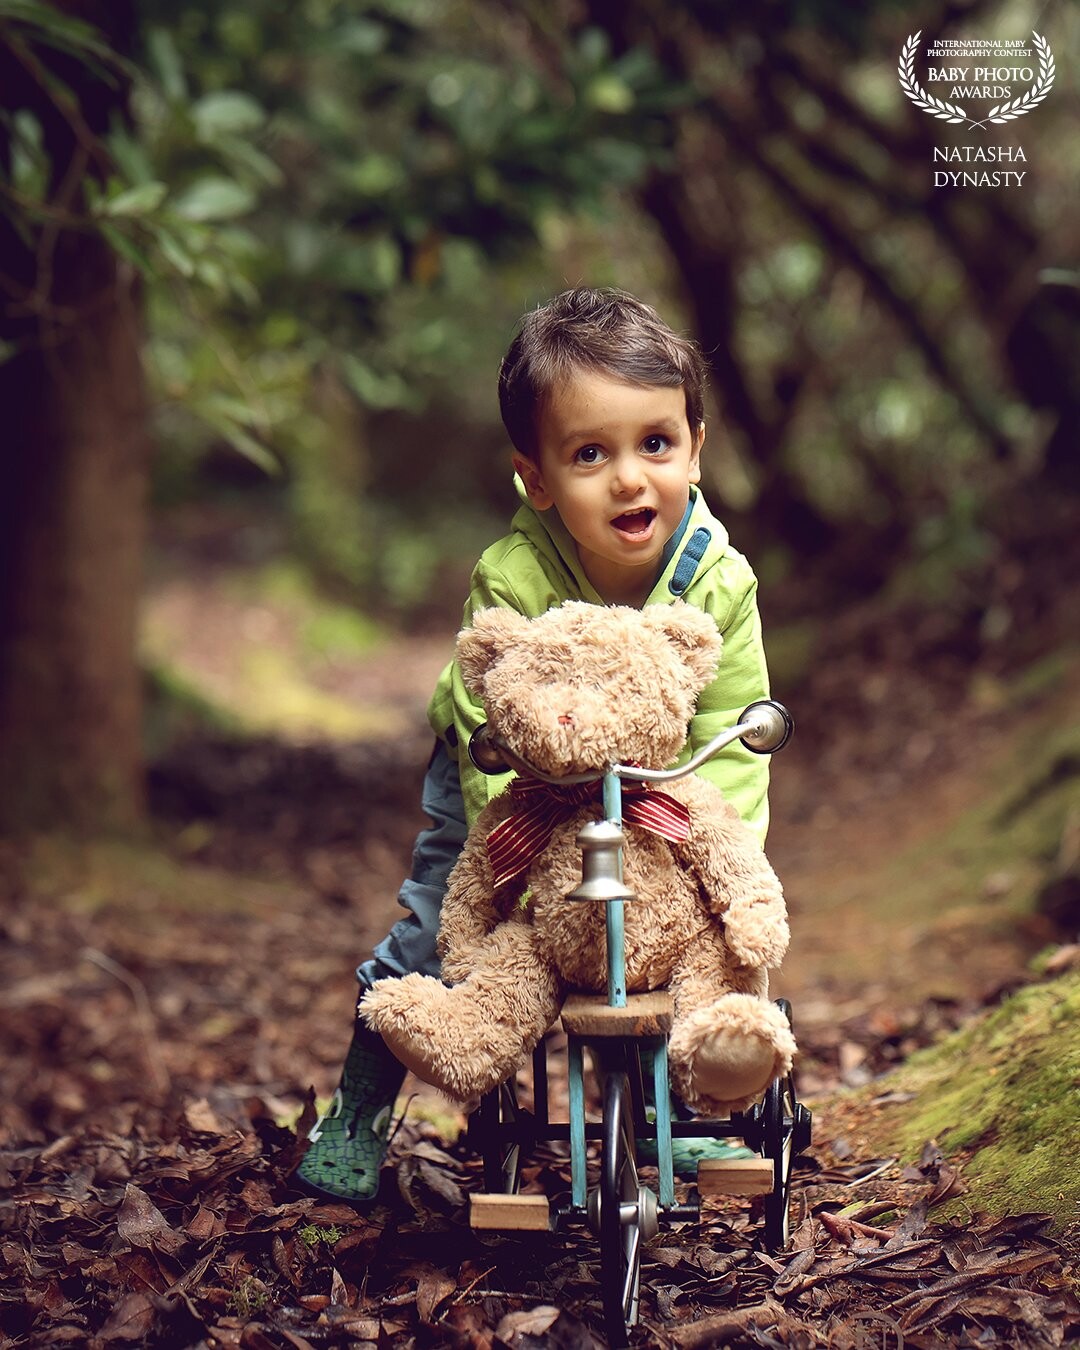 The Secret Forest Photoshoot. There is something magical about a little boy on a bike with his favourite bear. <br />
One of my favourite photoshoots as kids are so relaxed and taken by beauty of nature too. Hope you can feel this special magic in this photograph.